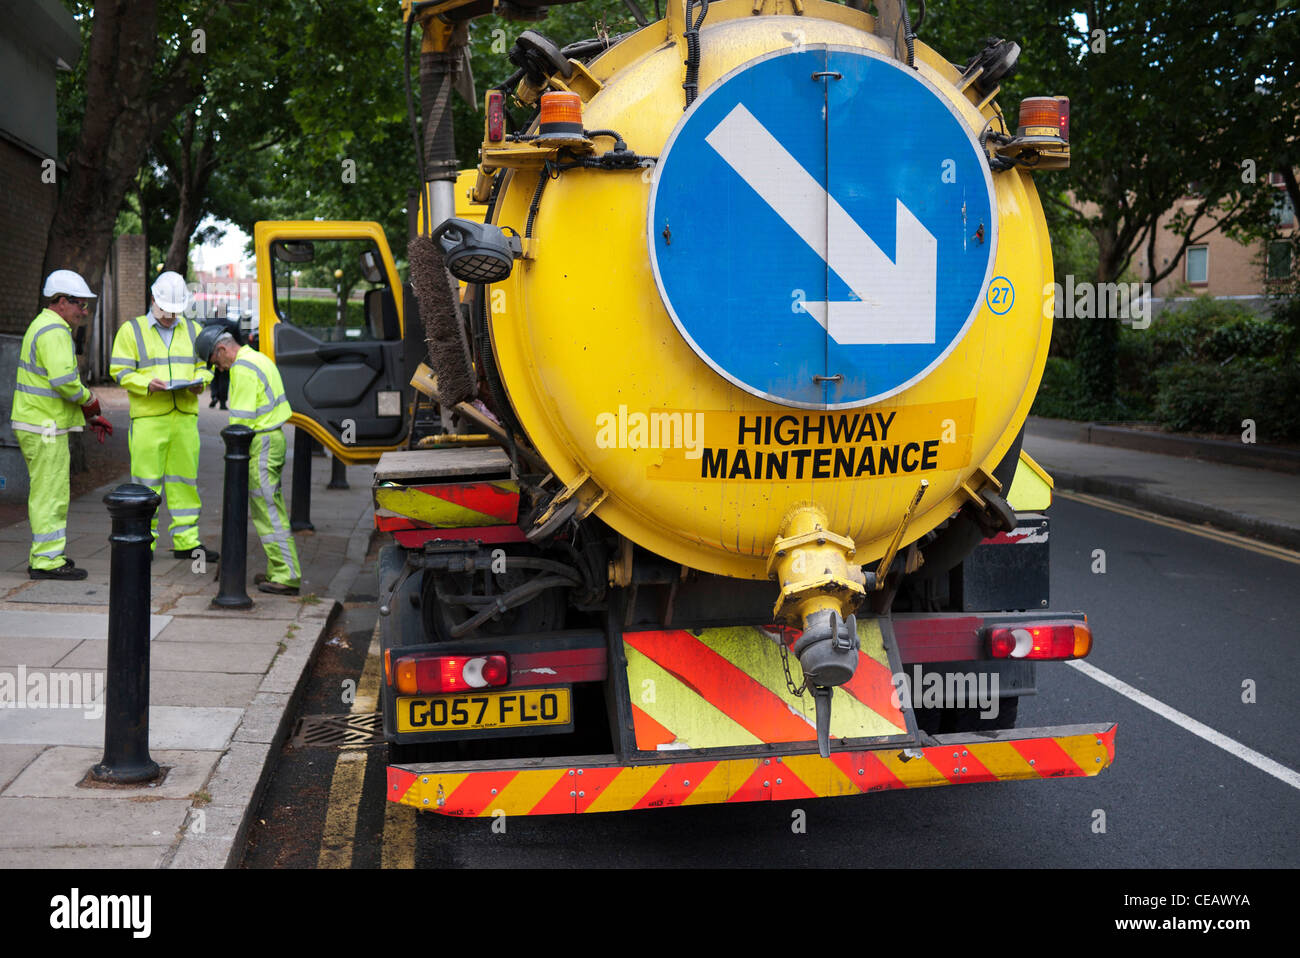 Highway maintenance workers and their vehicle working in London. This water truck inspecting pipelines in the road has a large blue sign with a white arrow to direct other road users around the wide vehicle. Stock Photo